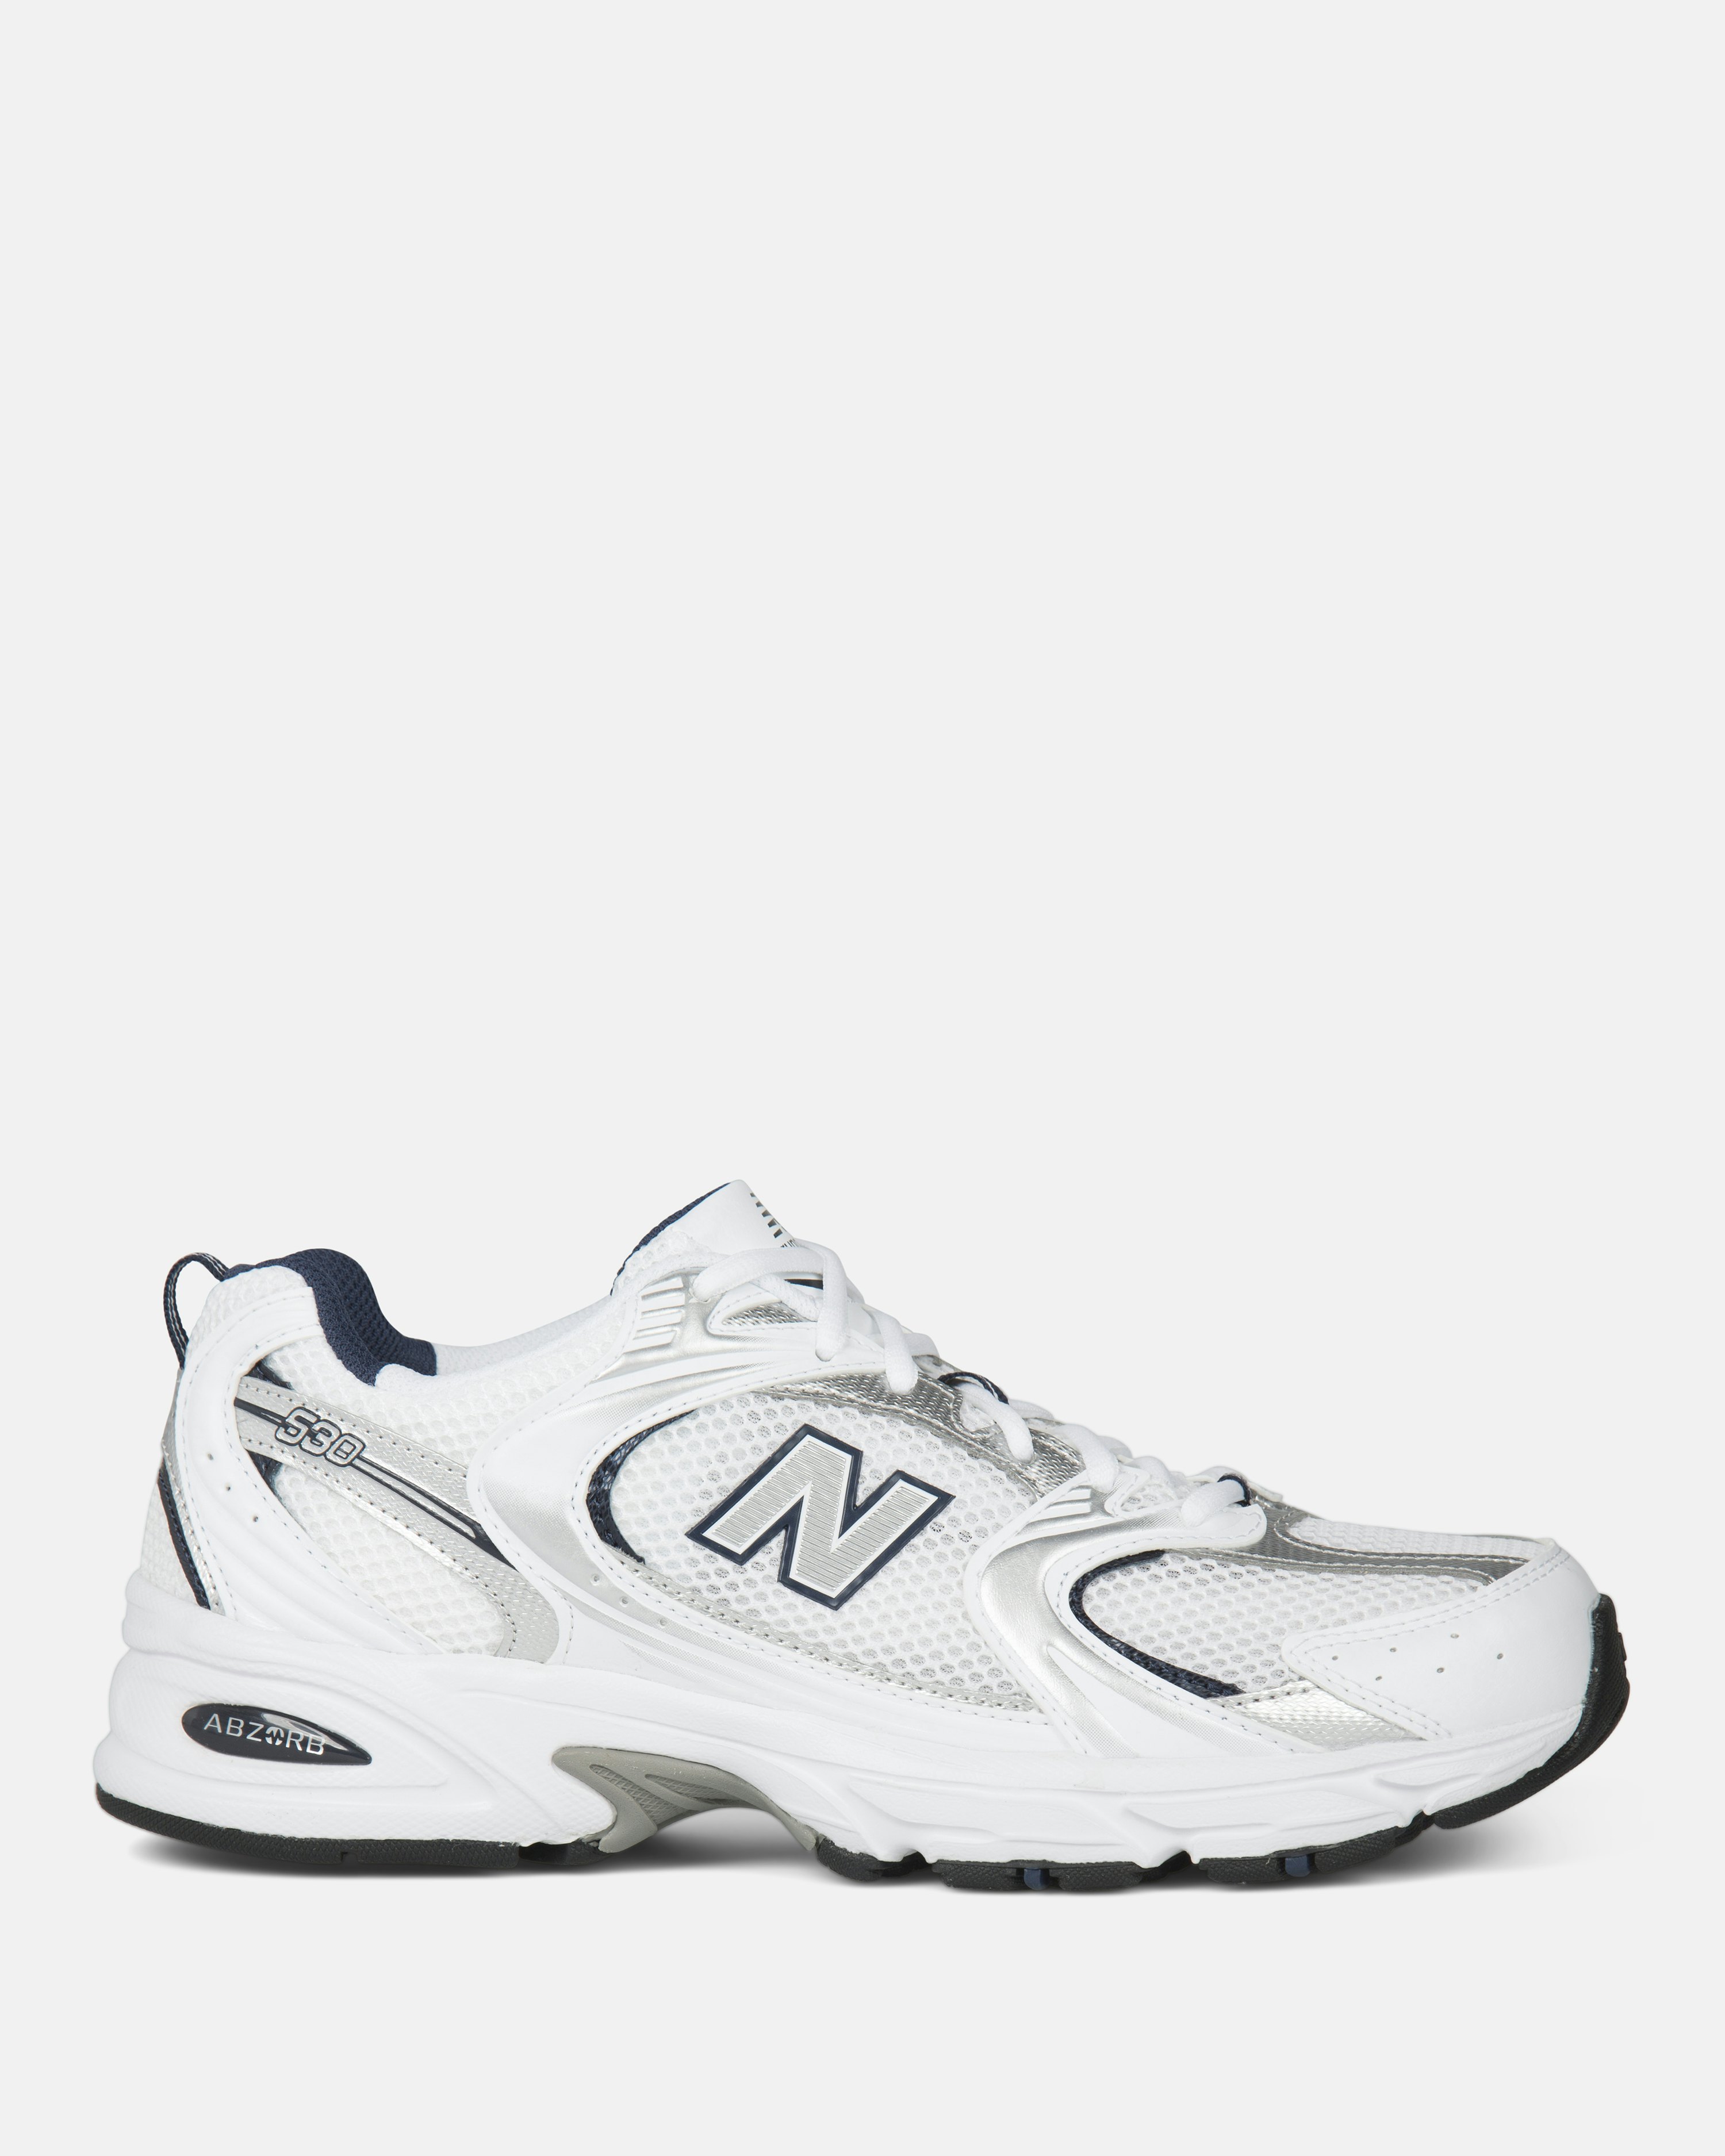 The New Balance 9060 Sneaker has Released | FallenFront